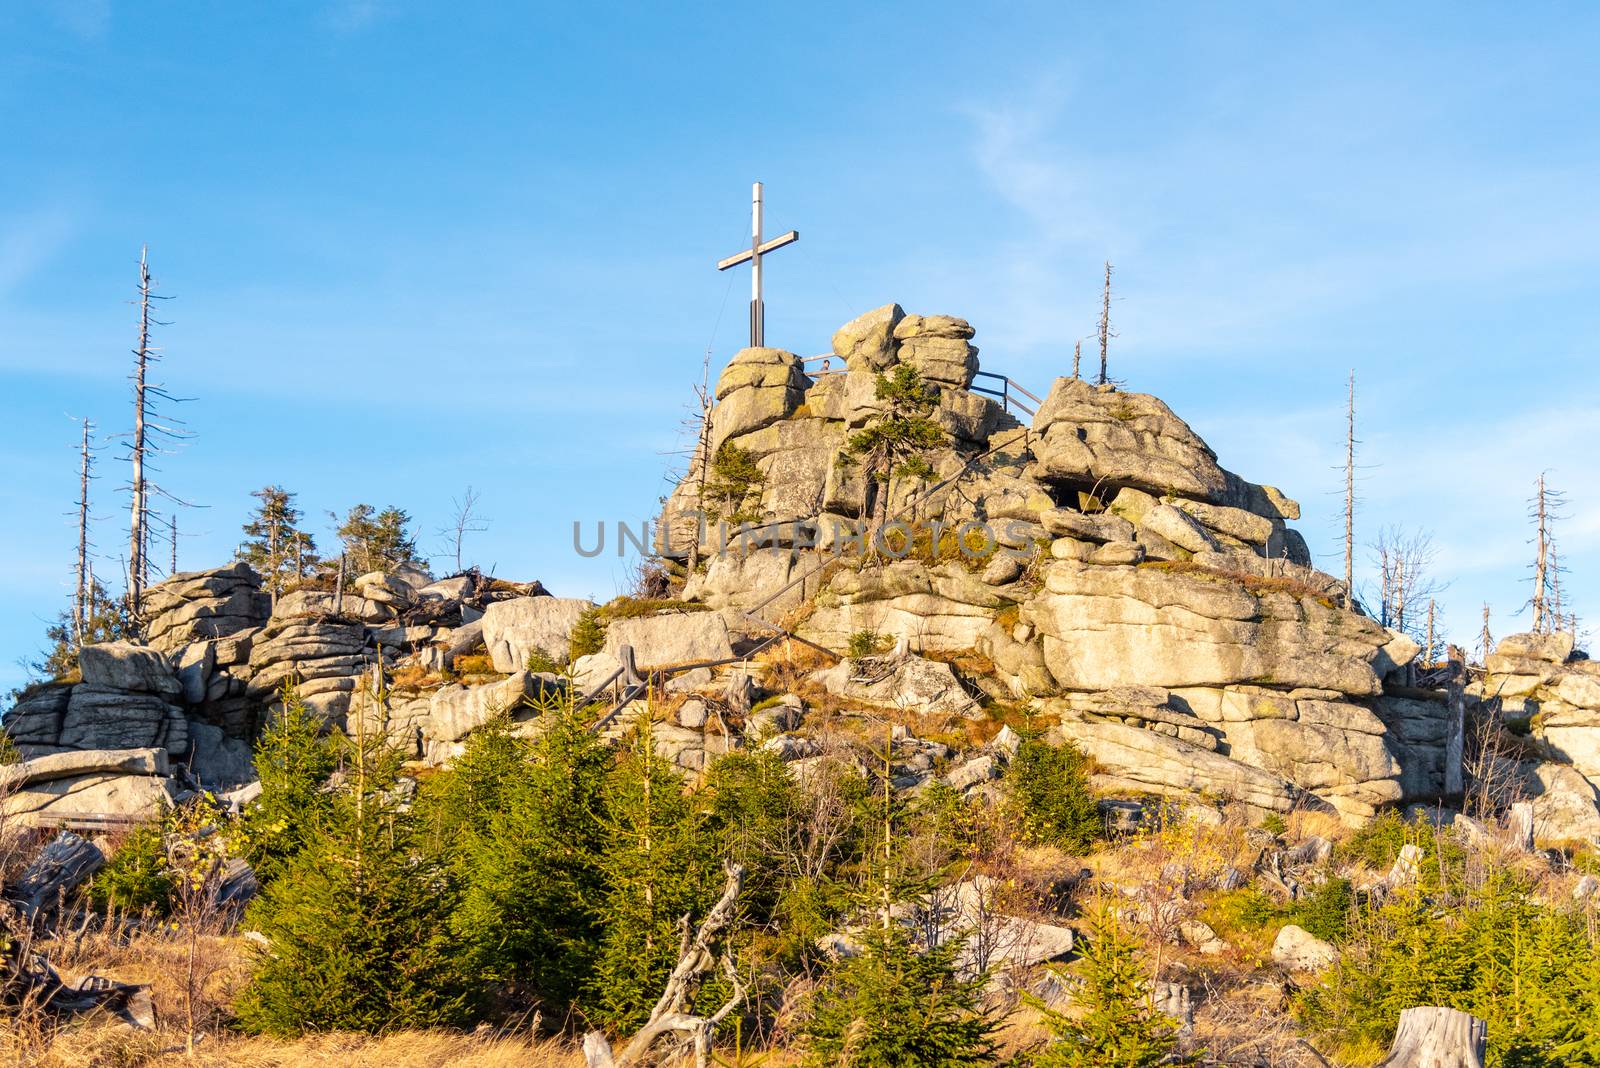 Granite rock formation with wooden cross on the top of Hochstein near Dreisesselberg, Tristolicnik. Border between Bayerische Wald in Germany and Sumava National Park in Czech Republic by pyty